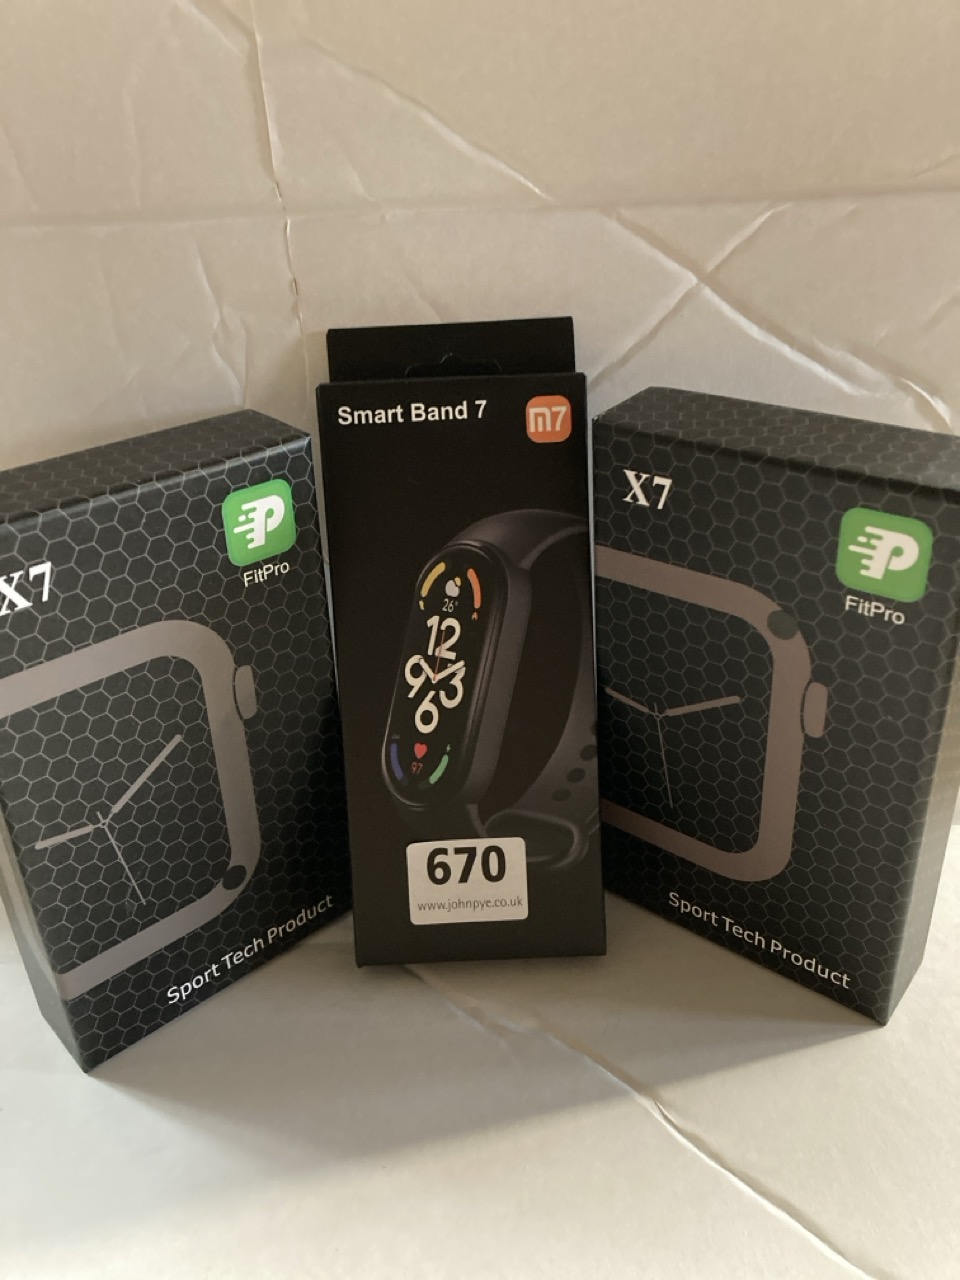 2 X SMARTWATCH "FITPRO X7" WITH BLUETOOTH 4.0, HEART RATE METER, BLOOD PRESSURE METER, SPORT MODE, CAMERA CONTROL AND ALARM. COMPATIBLE WITH ANDROID AND IOS. IN BOX. 1 X M7 SMART BAND 7 UP TO 30 WORK